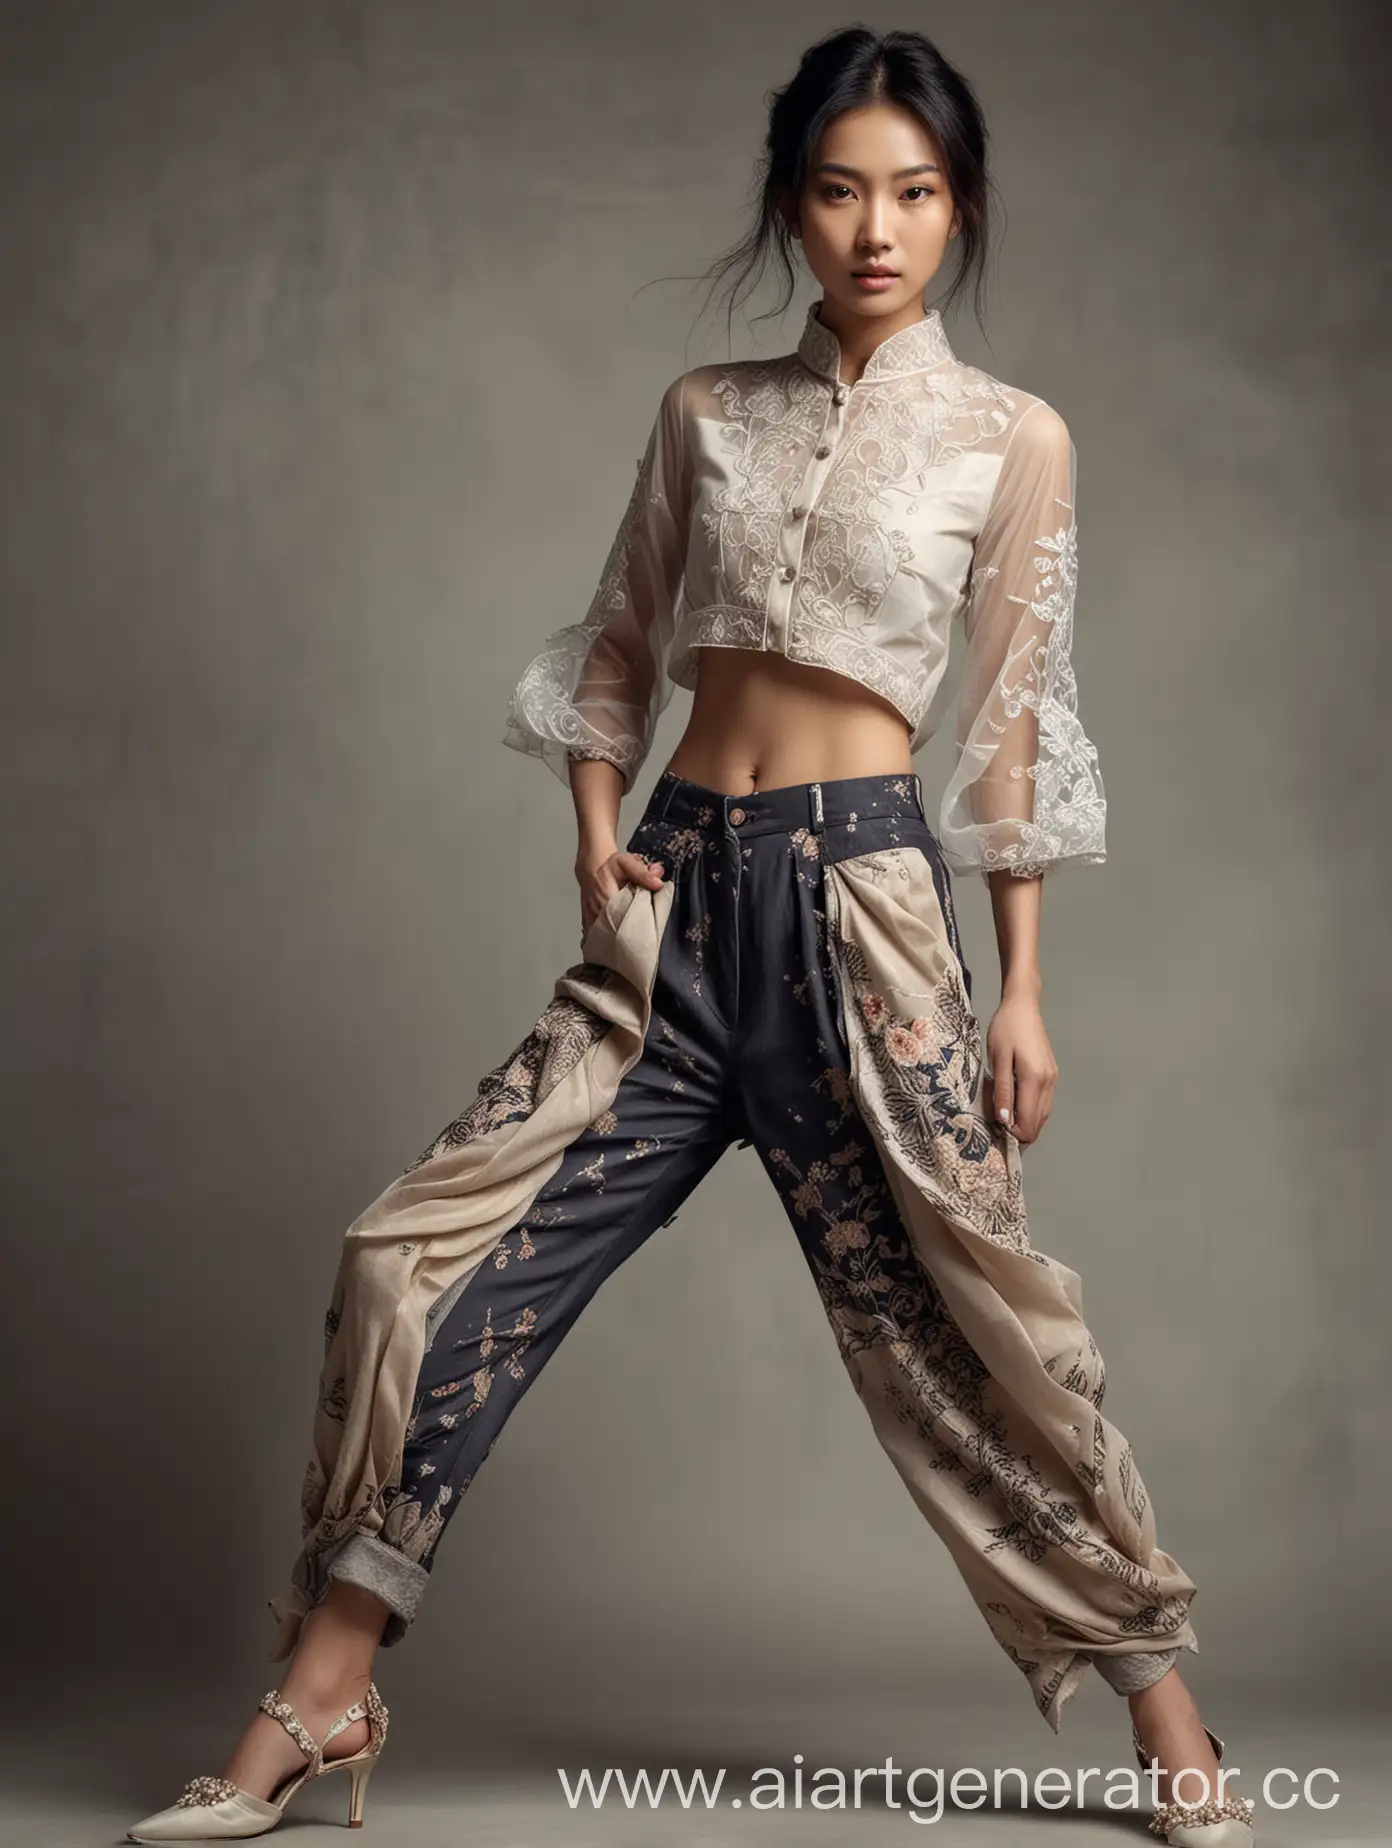 An Asian skinny model with beautiful face, posing dramatically , with trousers in Indian style. The structure of the material is crumpled paper and organza. Embroidery on sleeves and trousers with patterns. conceptual art, dark fantasy.